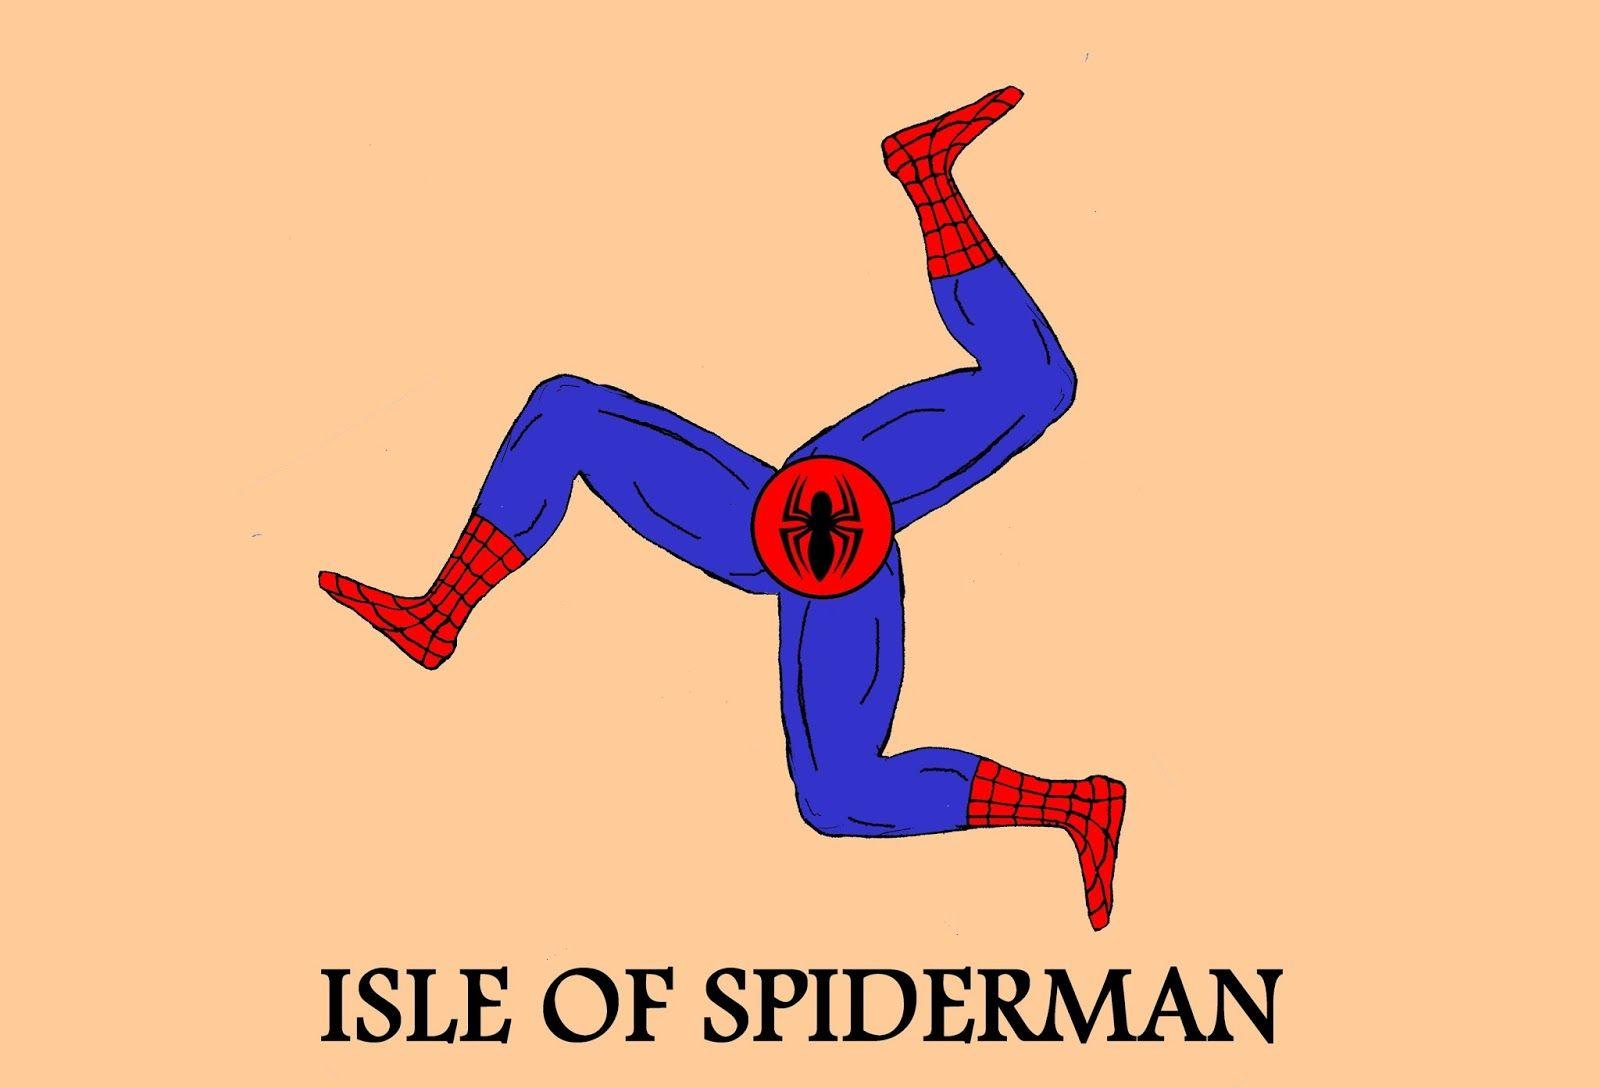 Spiderman Flag Logo - The Voice of Vexillology, Flags & Heraldry: Isle of Spiderman Flag